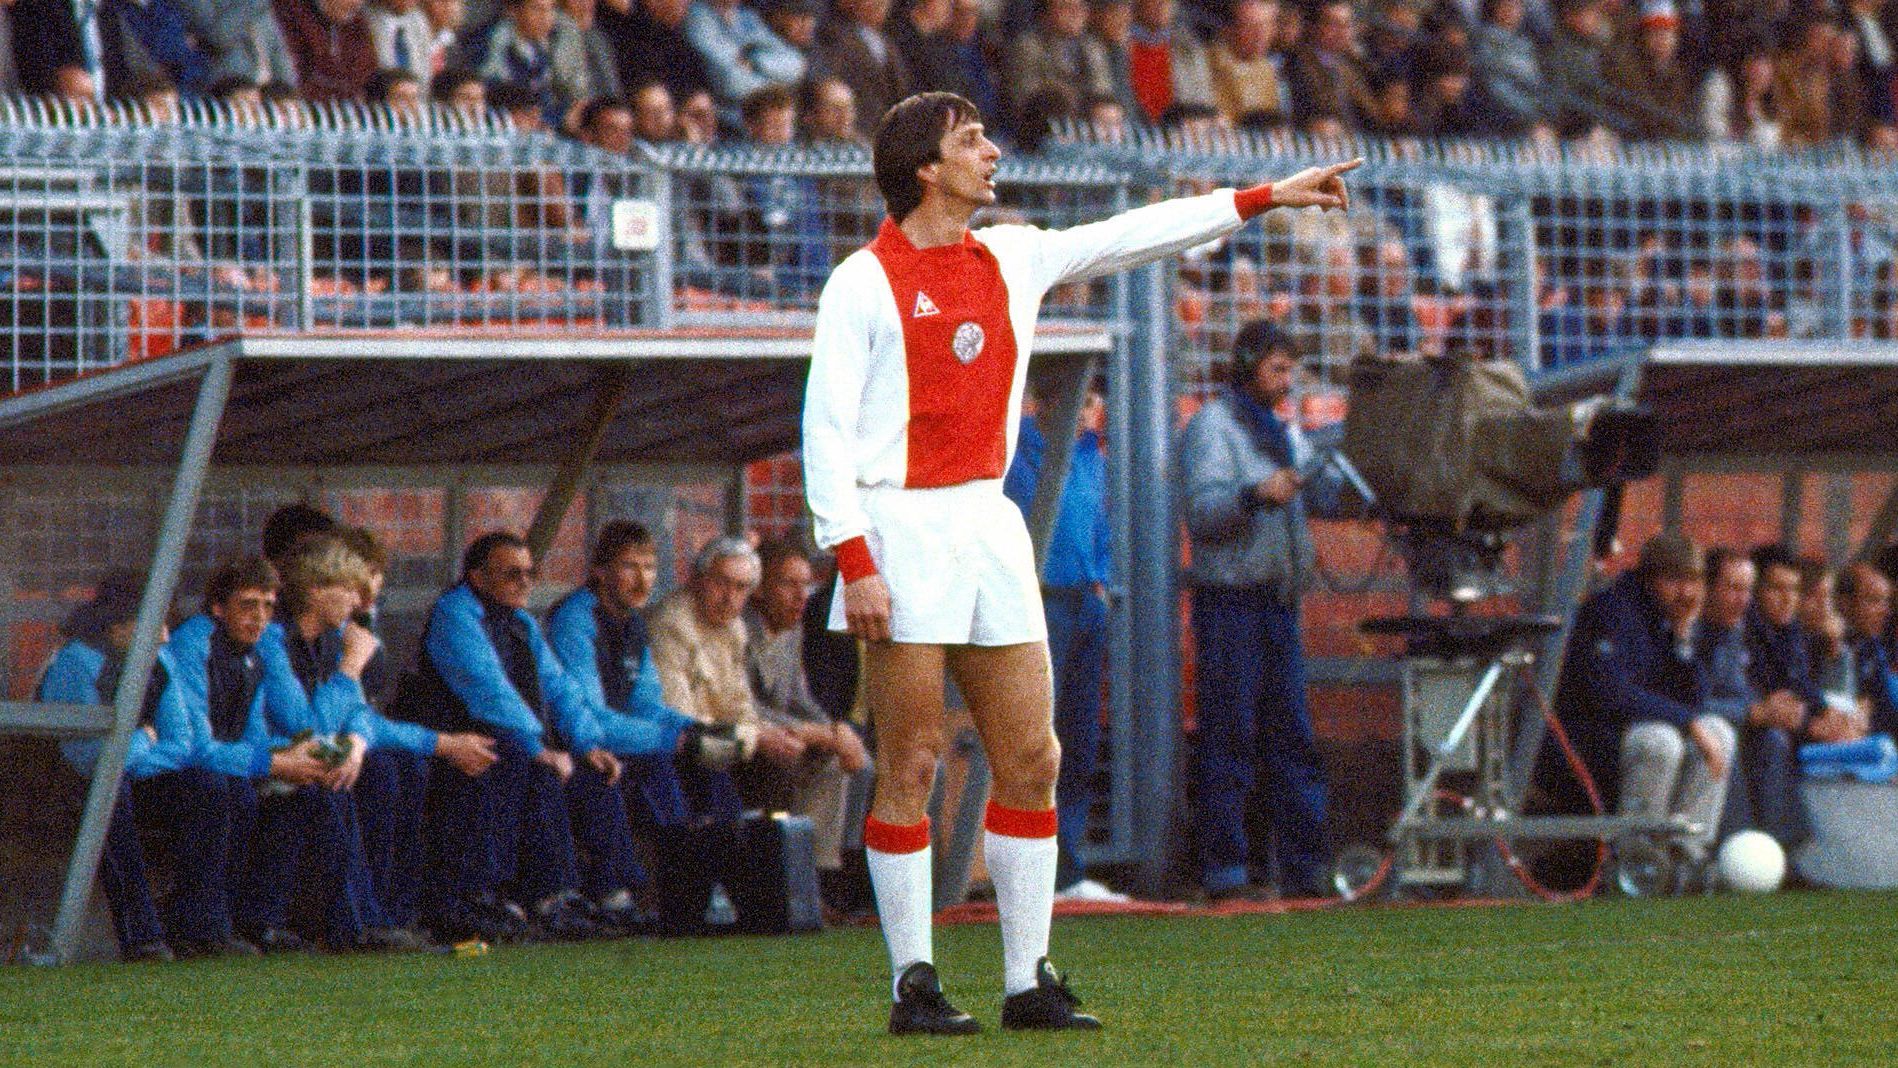 Cruyff returned to Ajax for a second spell towards the end of his career, before becoming the club's manager in 1985.